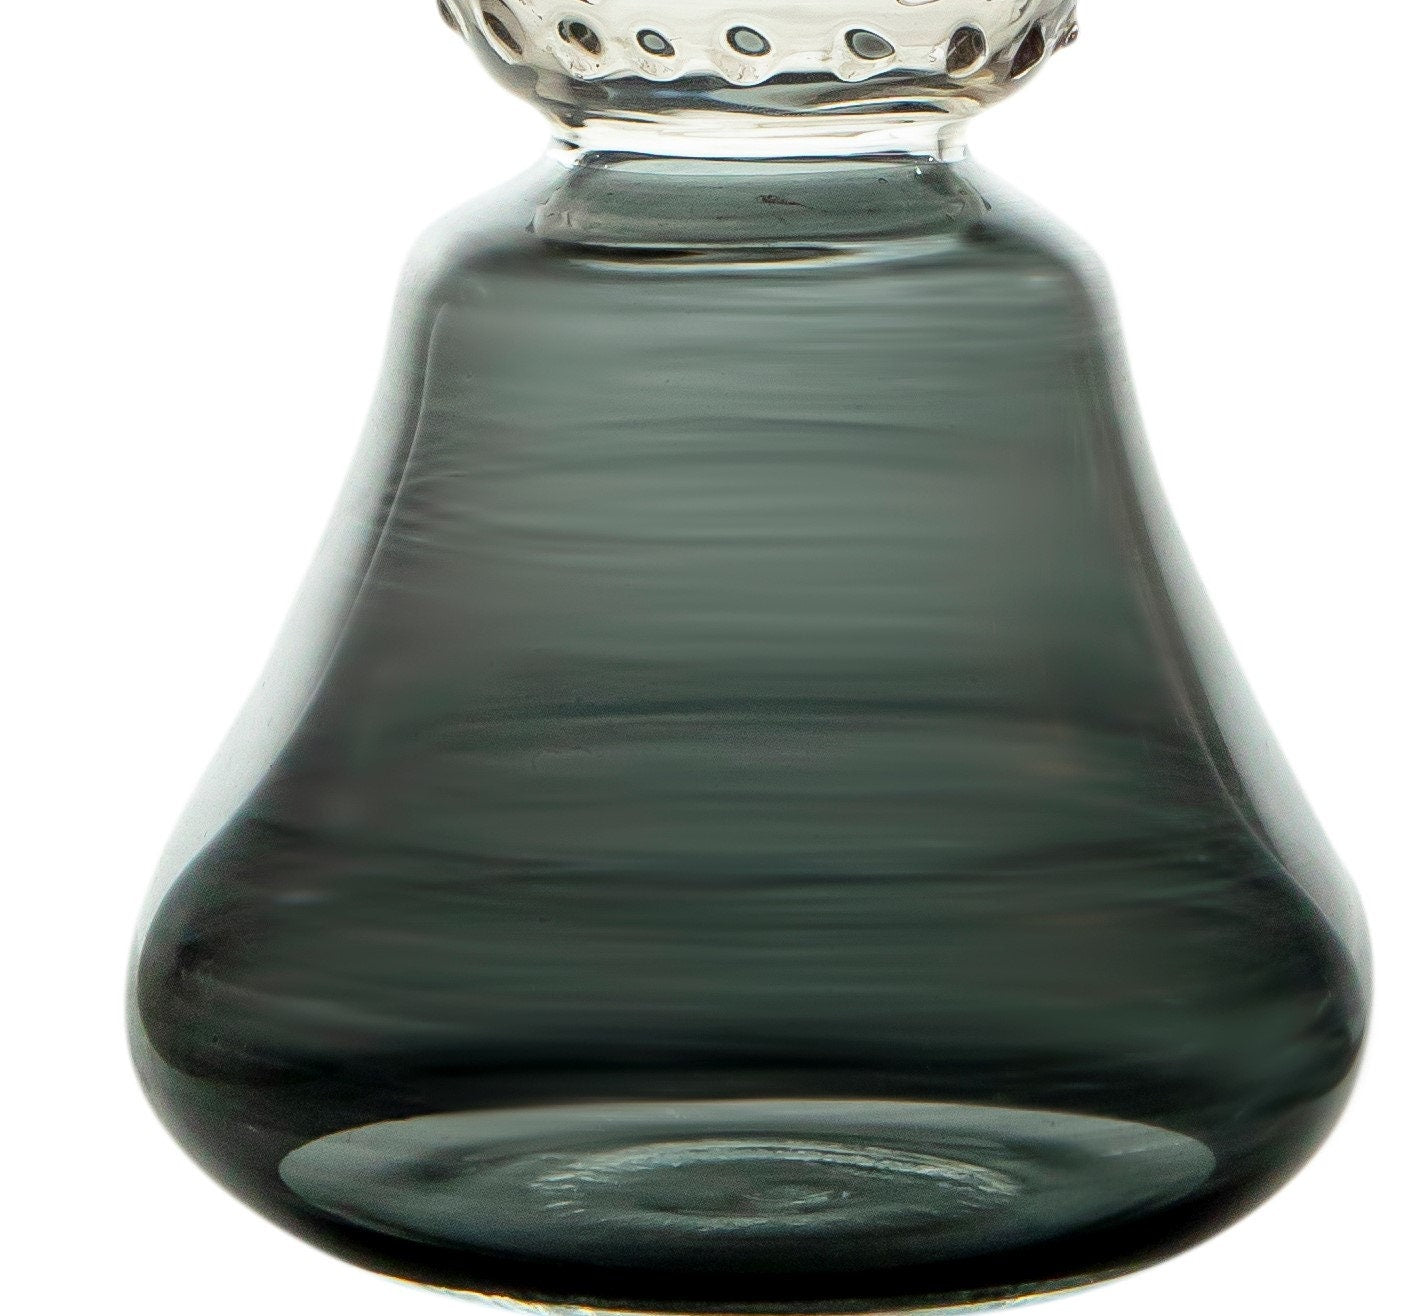 Shaded Black Vintage Classic Decanter Bottle with Stopper - Les Trois Pyramides